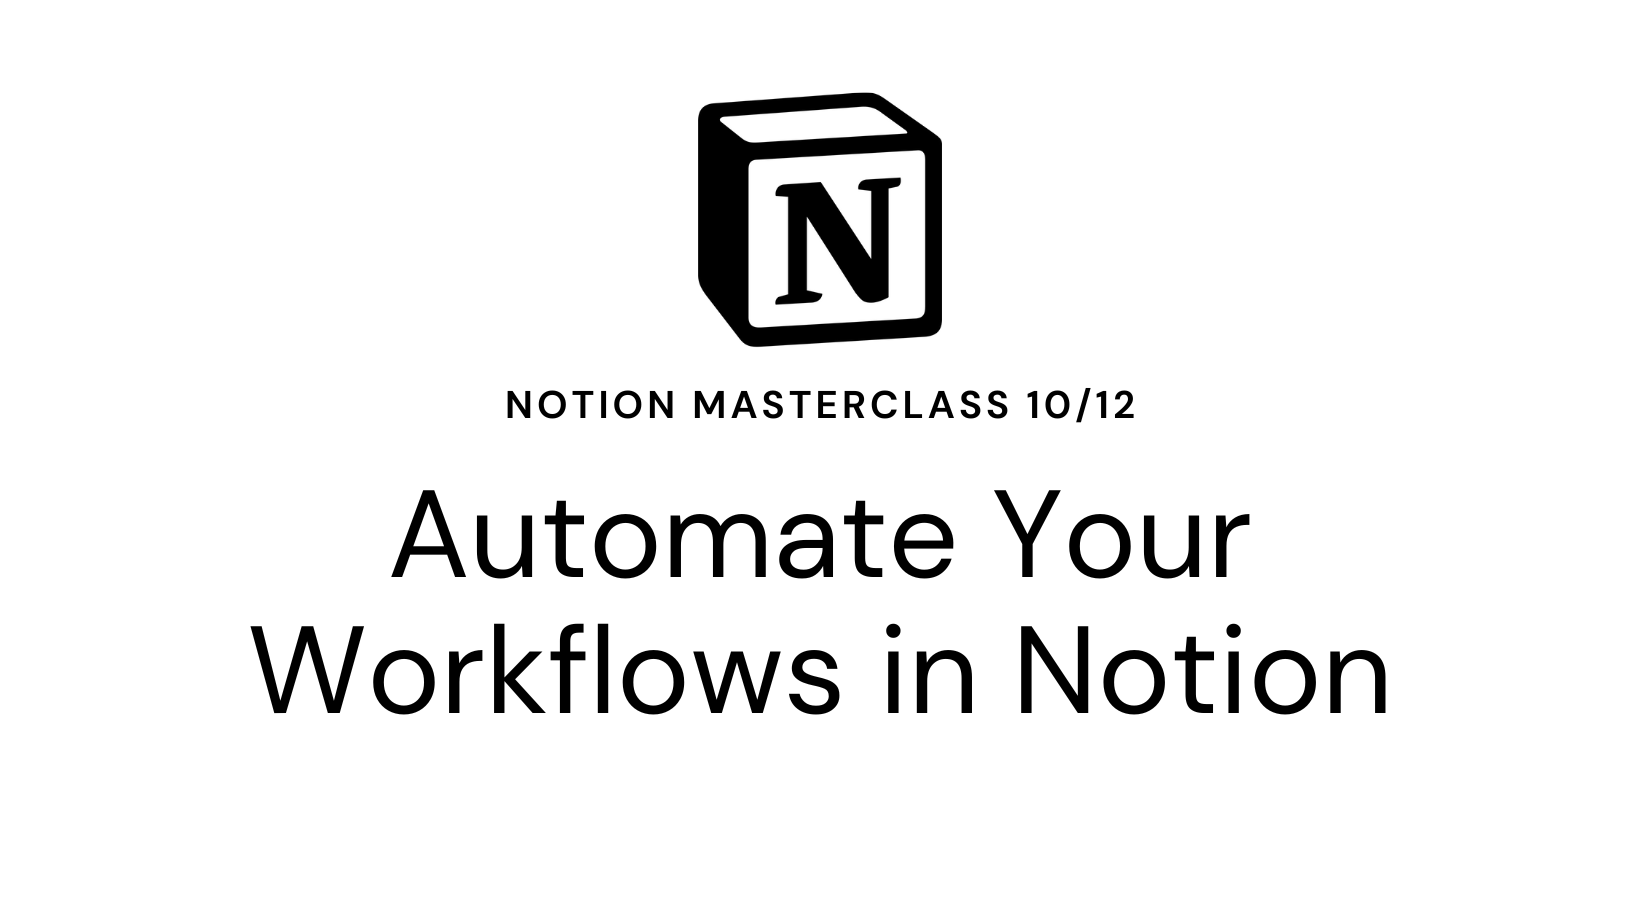 Notion Masterclass 10/12 Automate Your Workflows in Notion